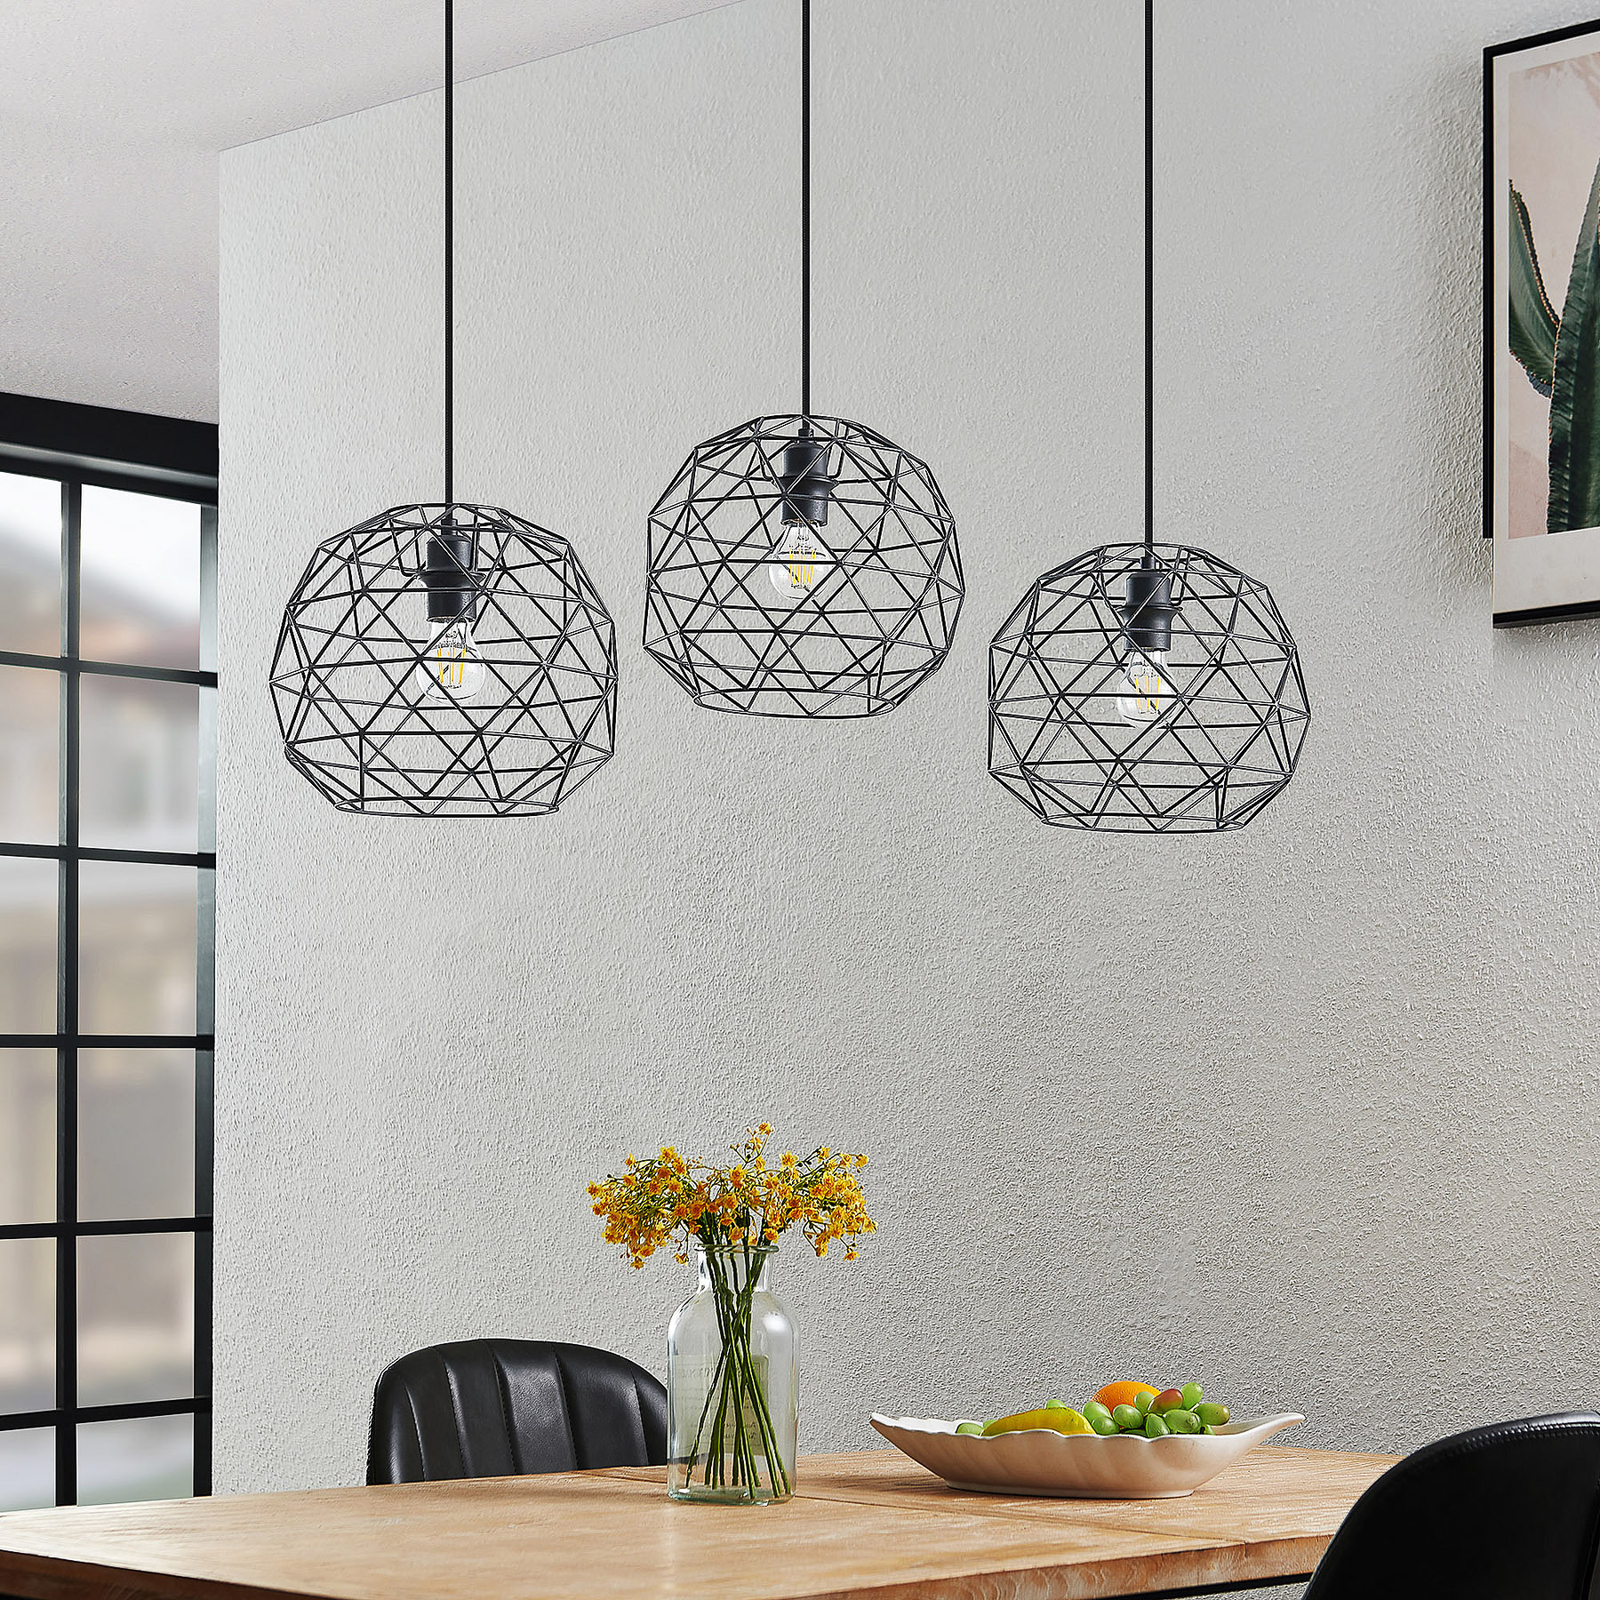 Lindby Paridimo hanging light in steel, 3-bulb